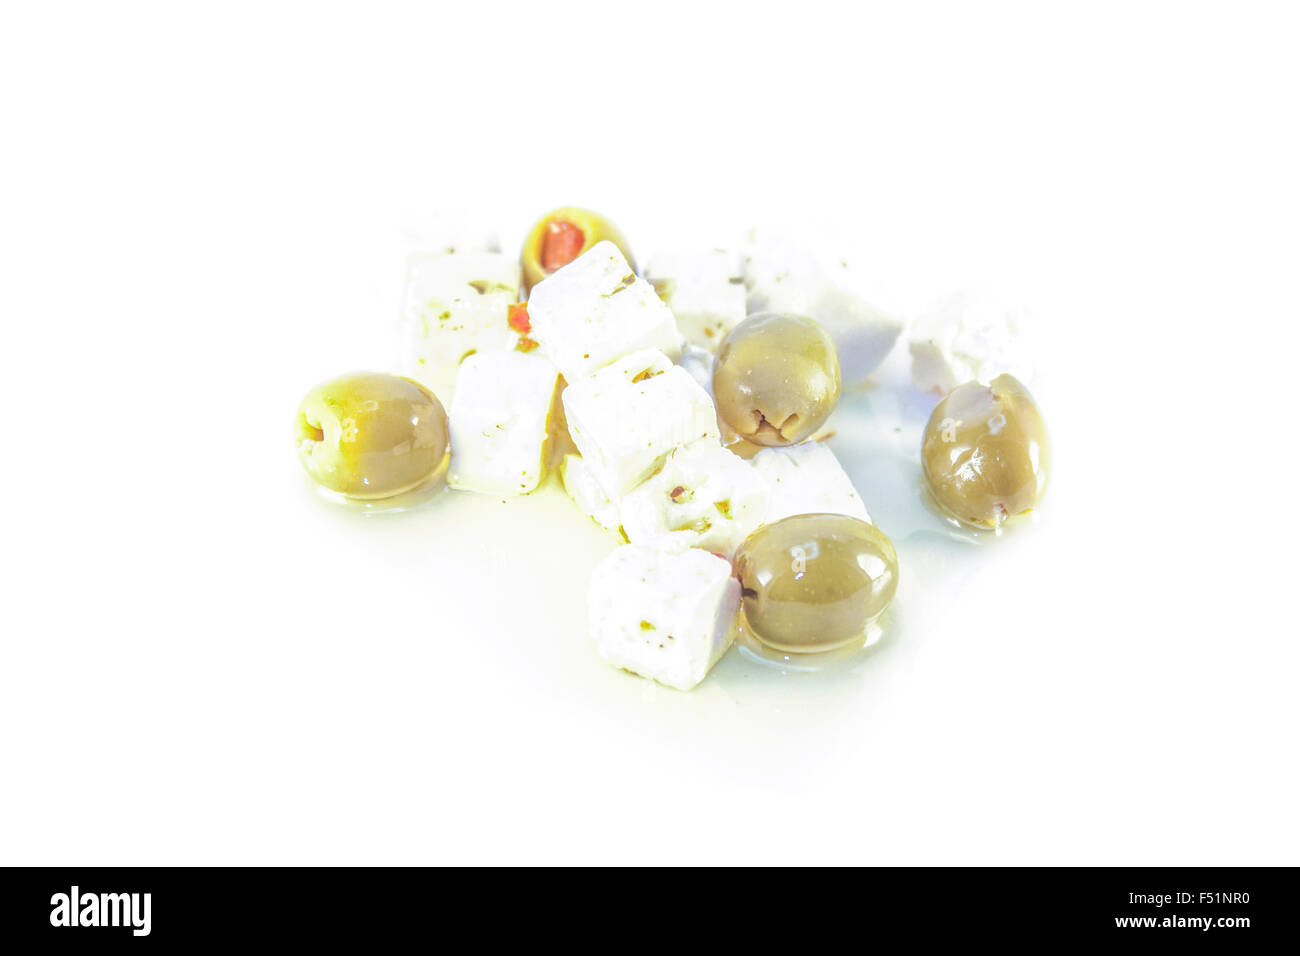 White feta cheese and green olives, isolated on white background Stock Photo